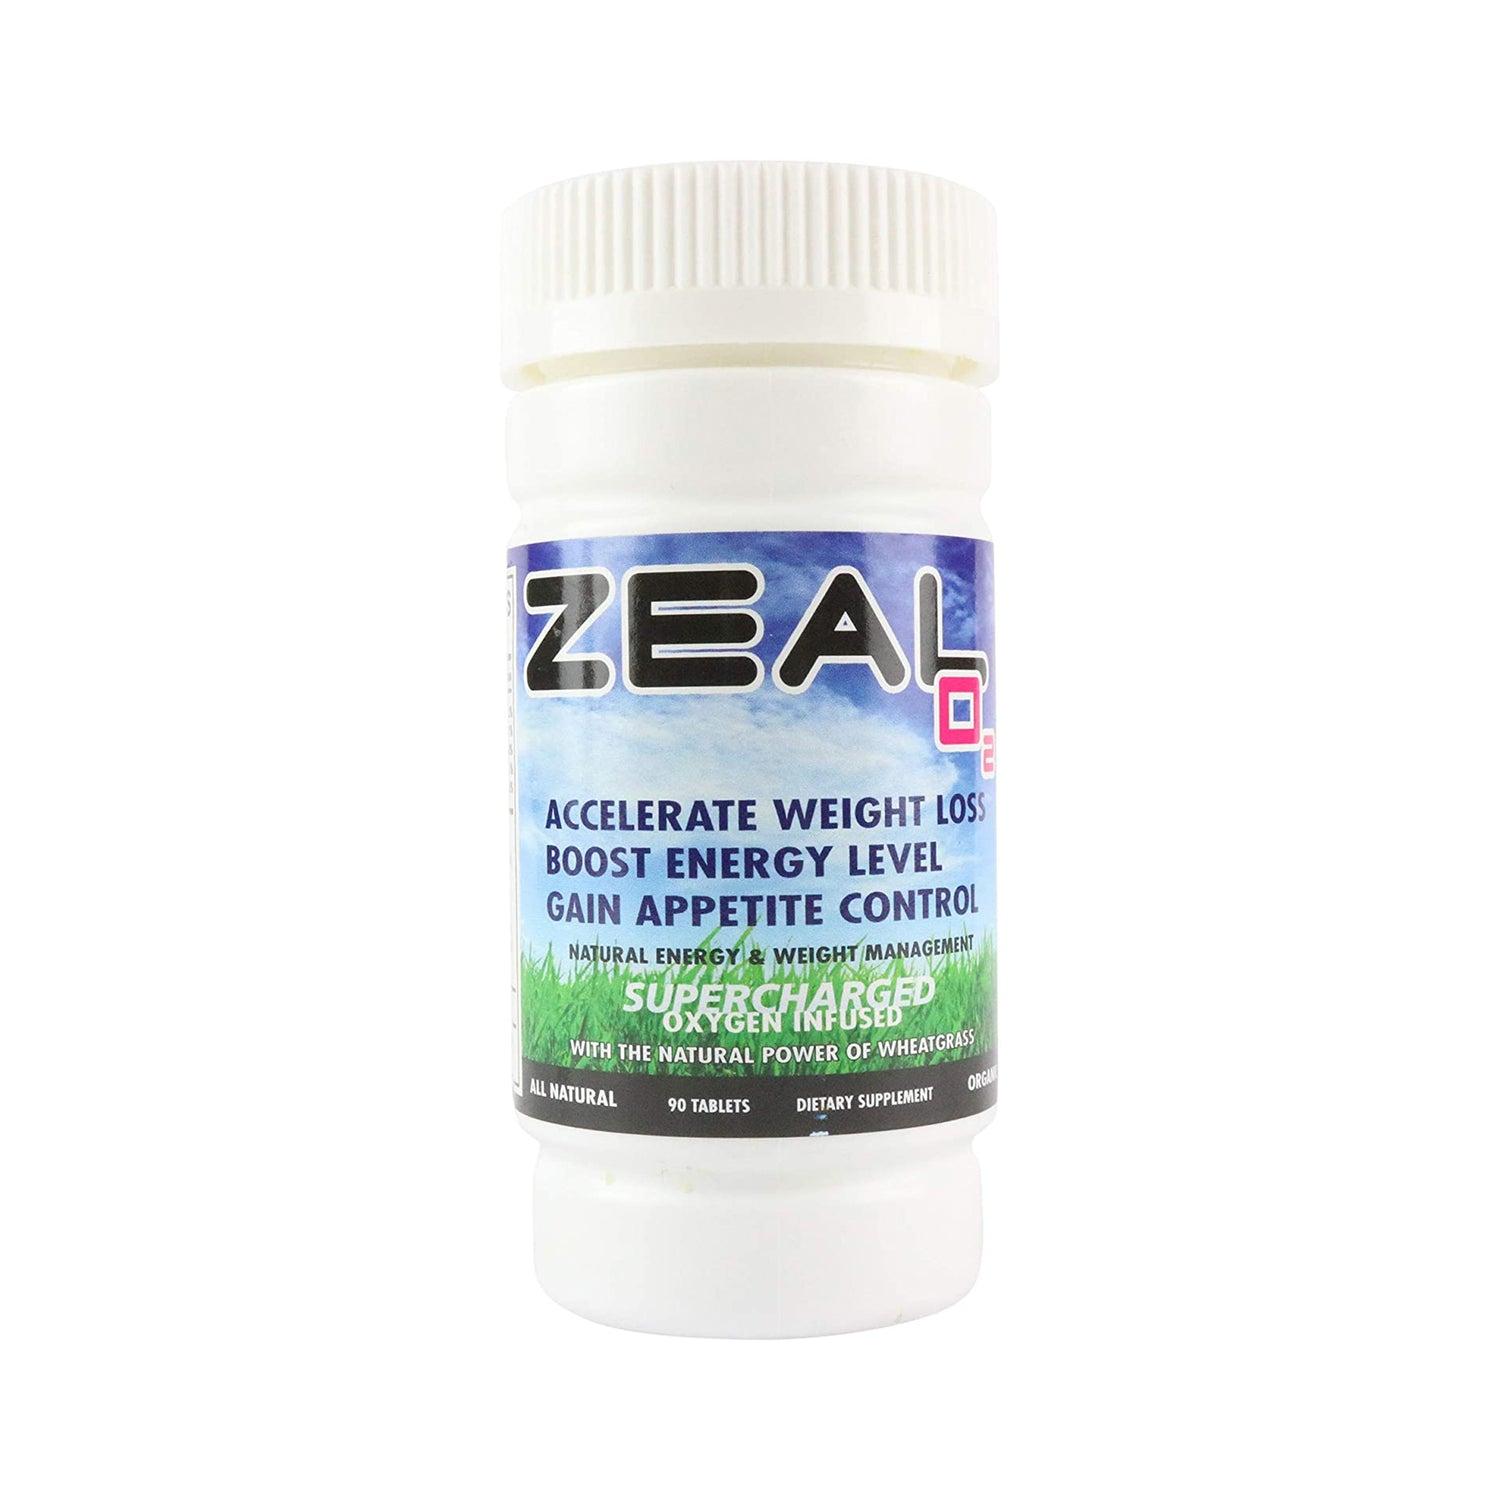 natural energy boost - ADRENAL SUPPORT - weight loss accessories